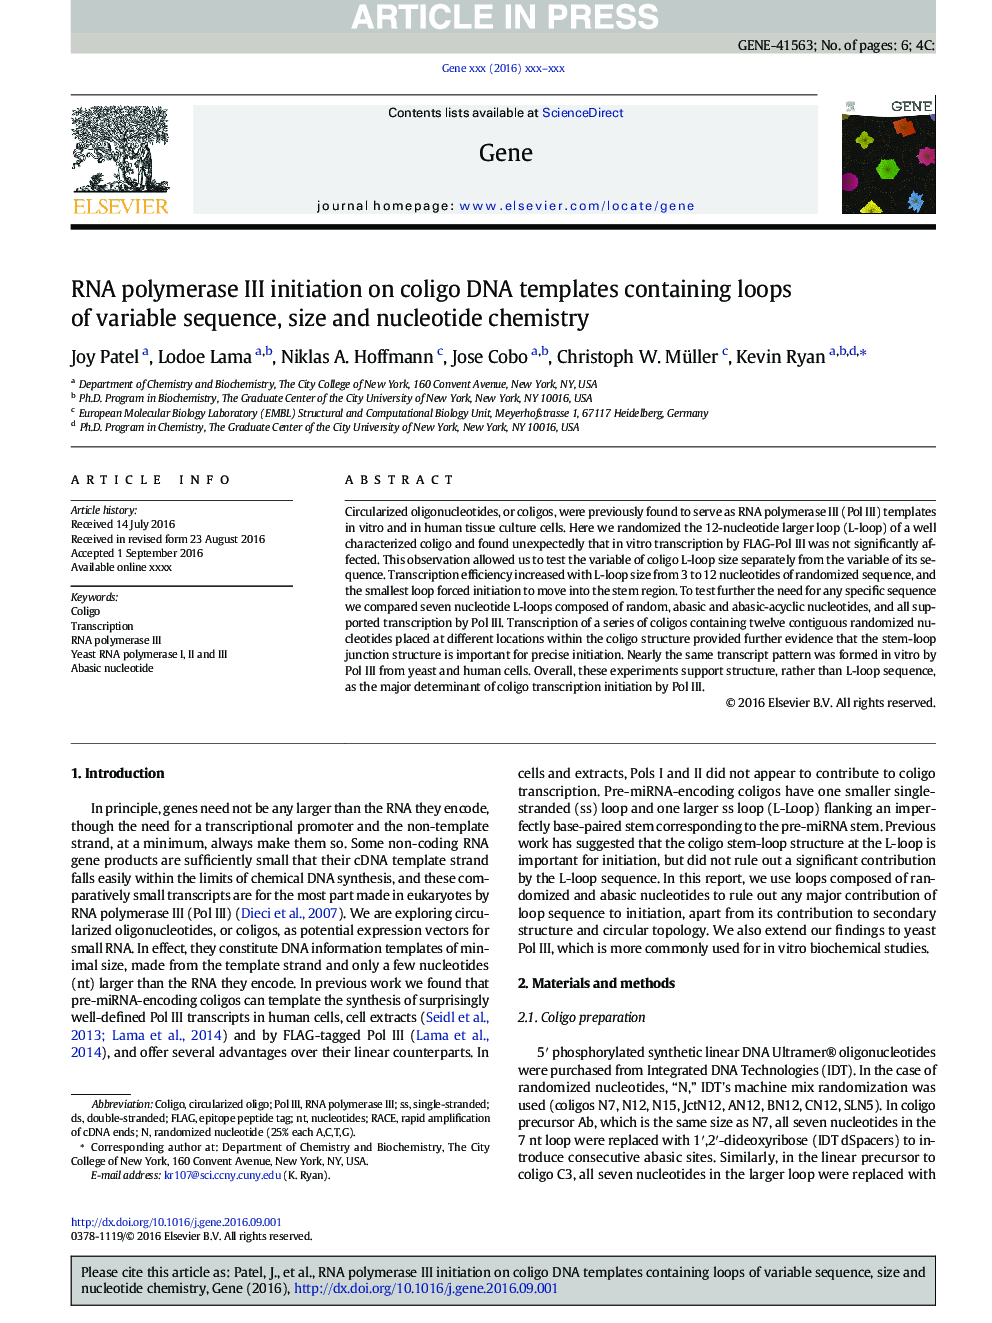 RNA polymerase III initiation on coligo DNA templates containing loops of variable sequence, size and nucleotide chemistry